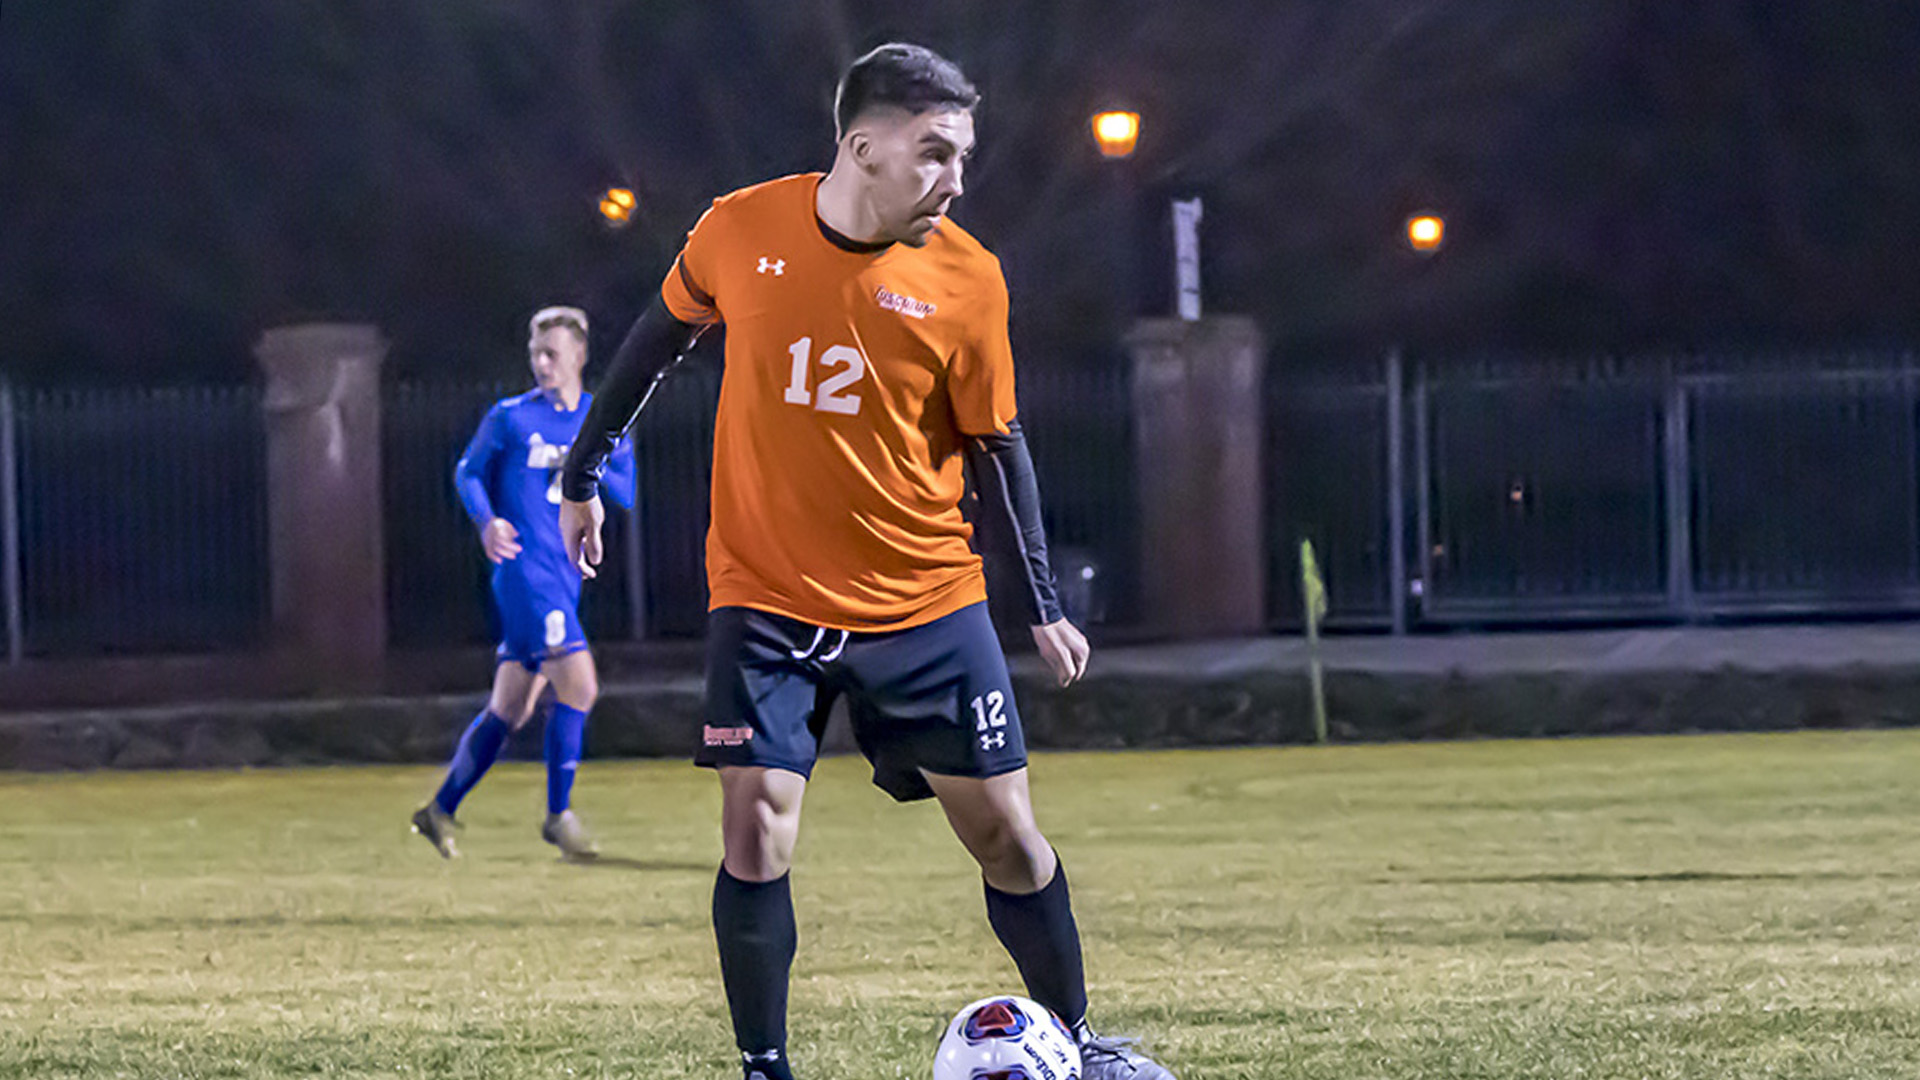 Three second-half goals send Carson-Newman to 3-0 win in first leg of home-and-home